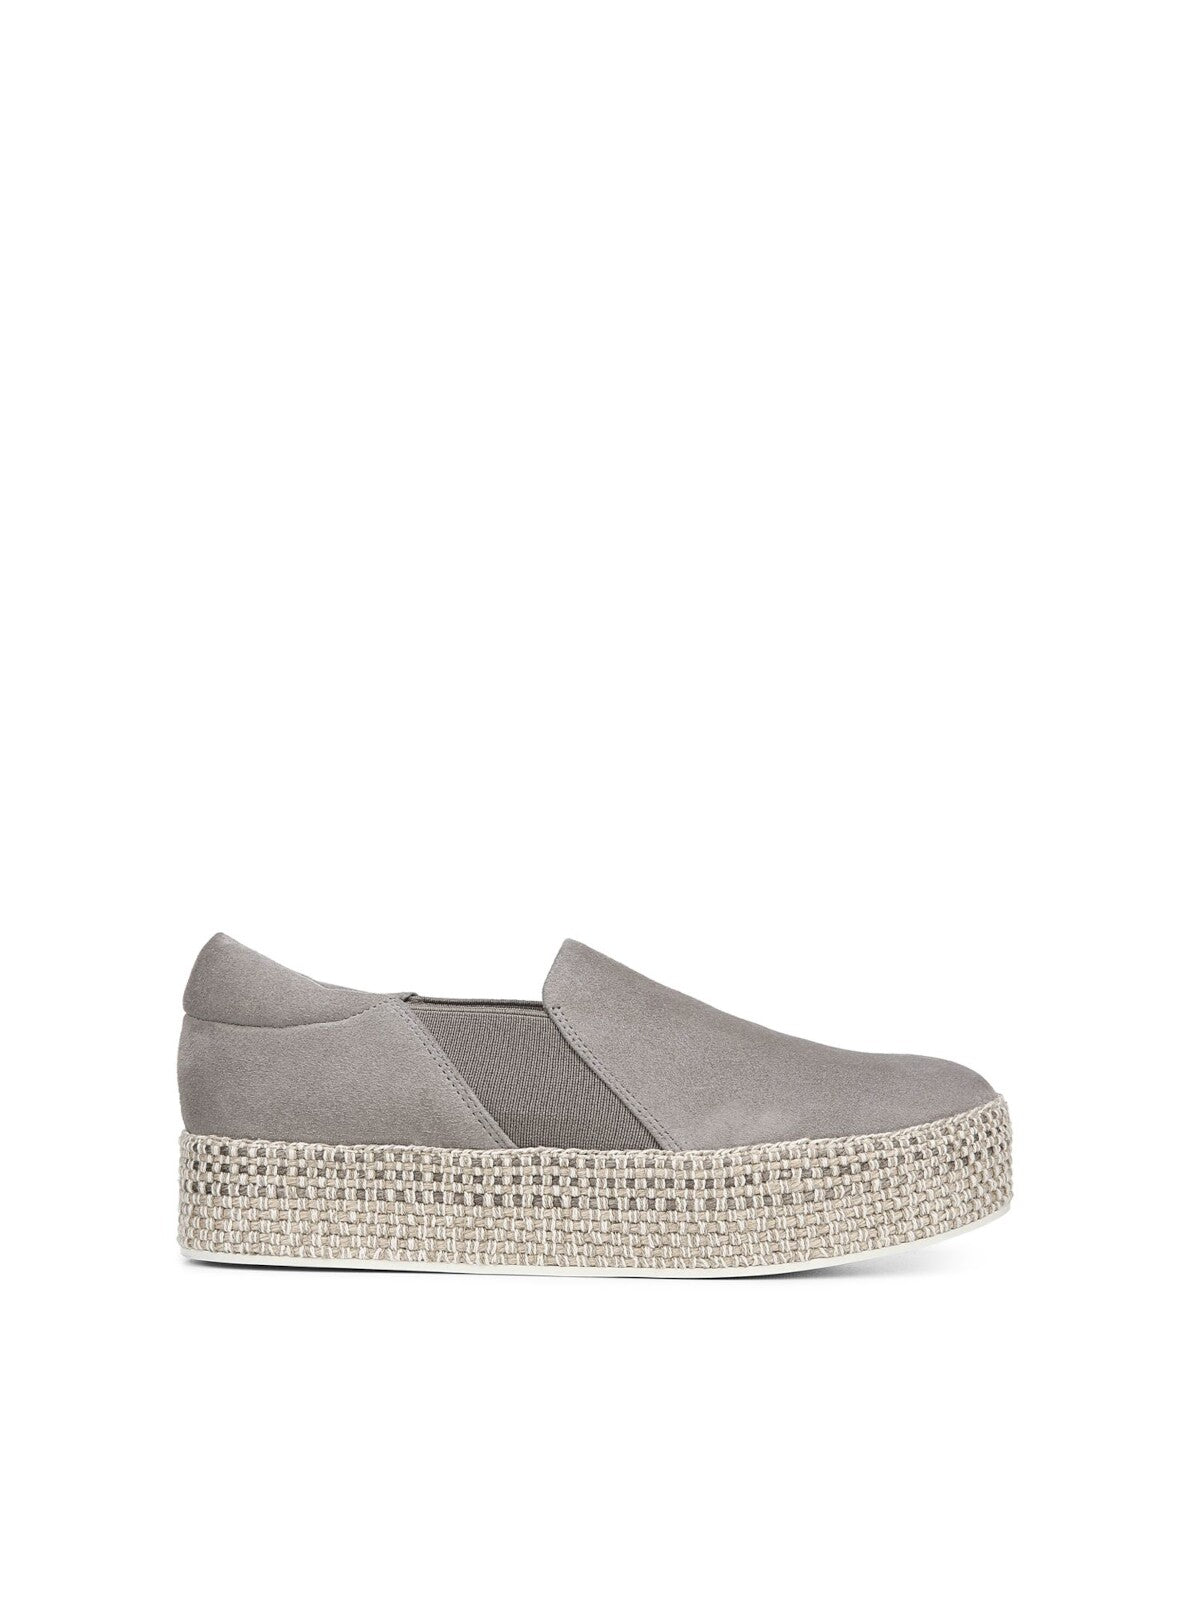 VINCE. Womens Gray Stretch Gore Comfort Wilden Round Toe Platform Slip On Leather Espadrille Shoes M